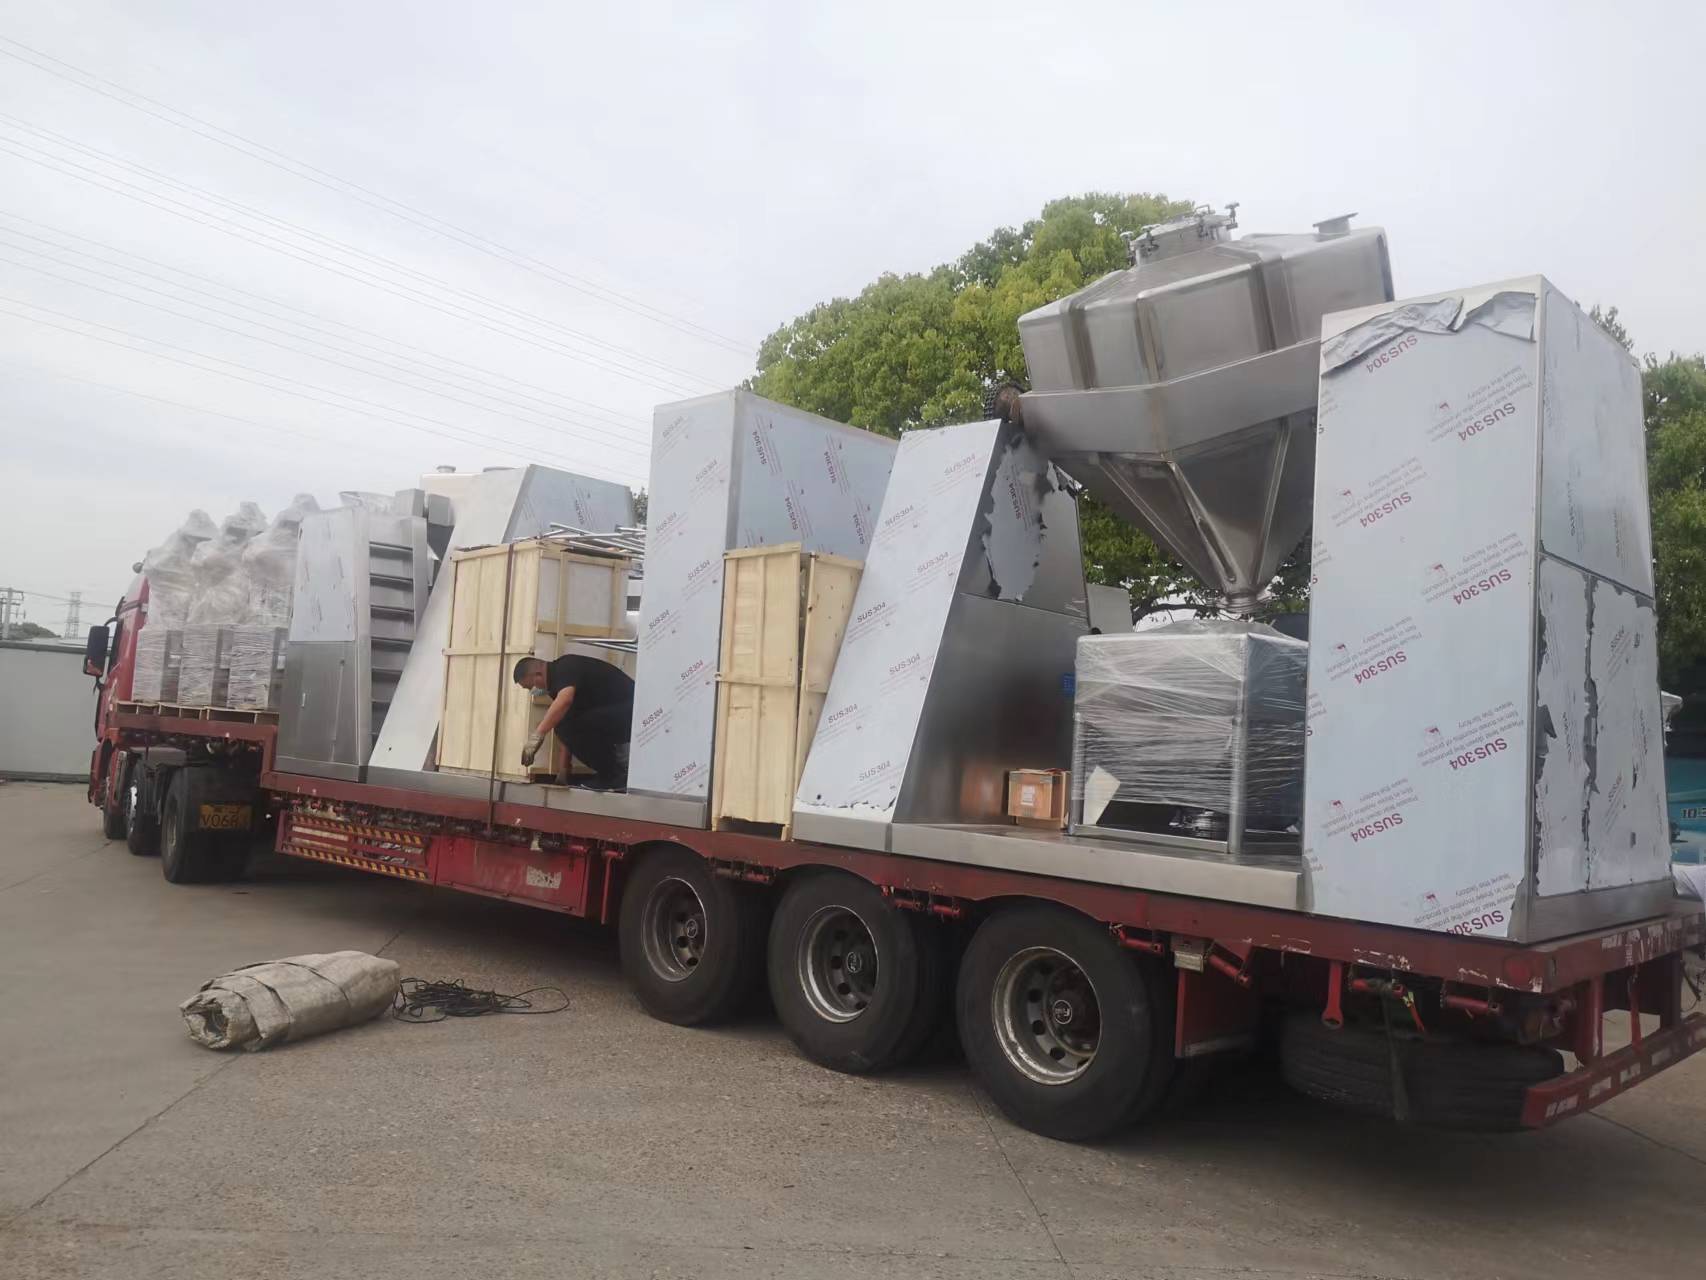 The FZH-2000 Bin blender and pharma bins have been delivered